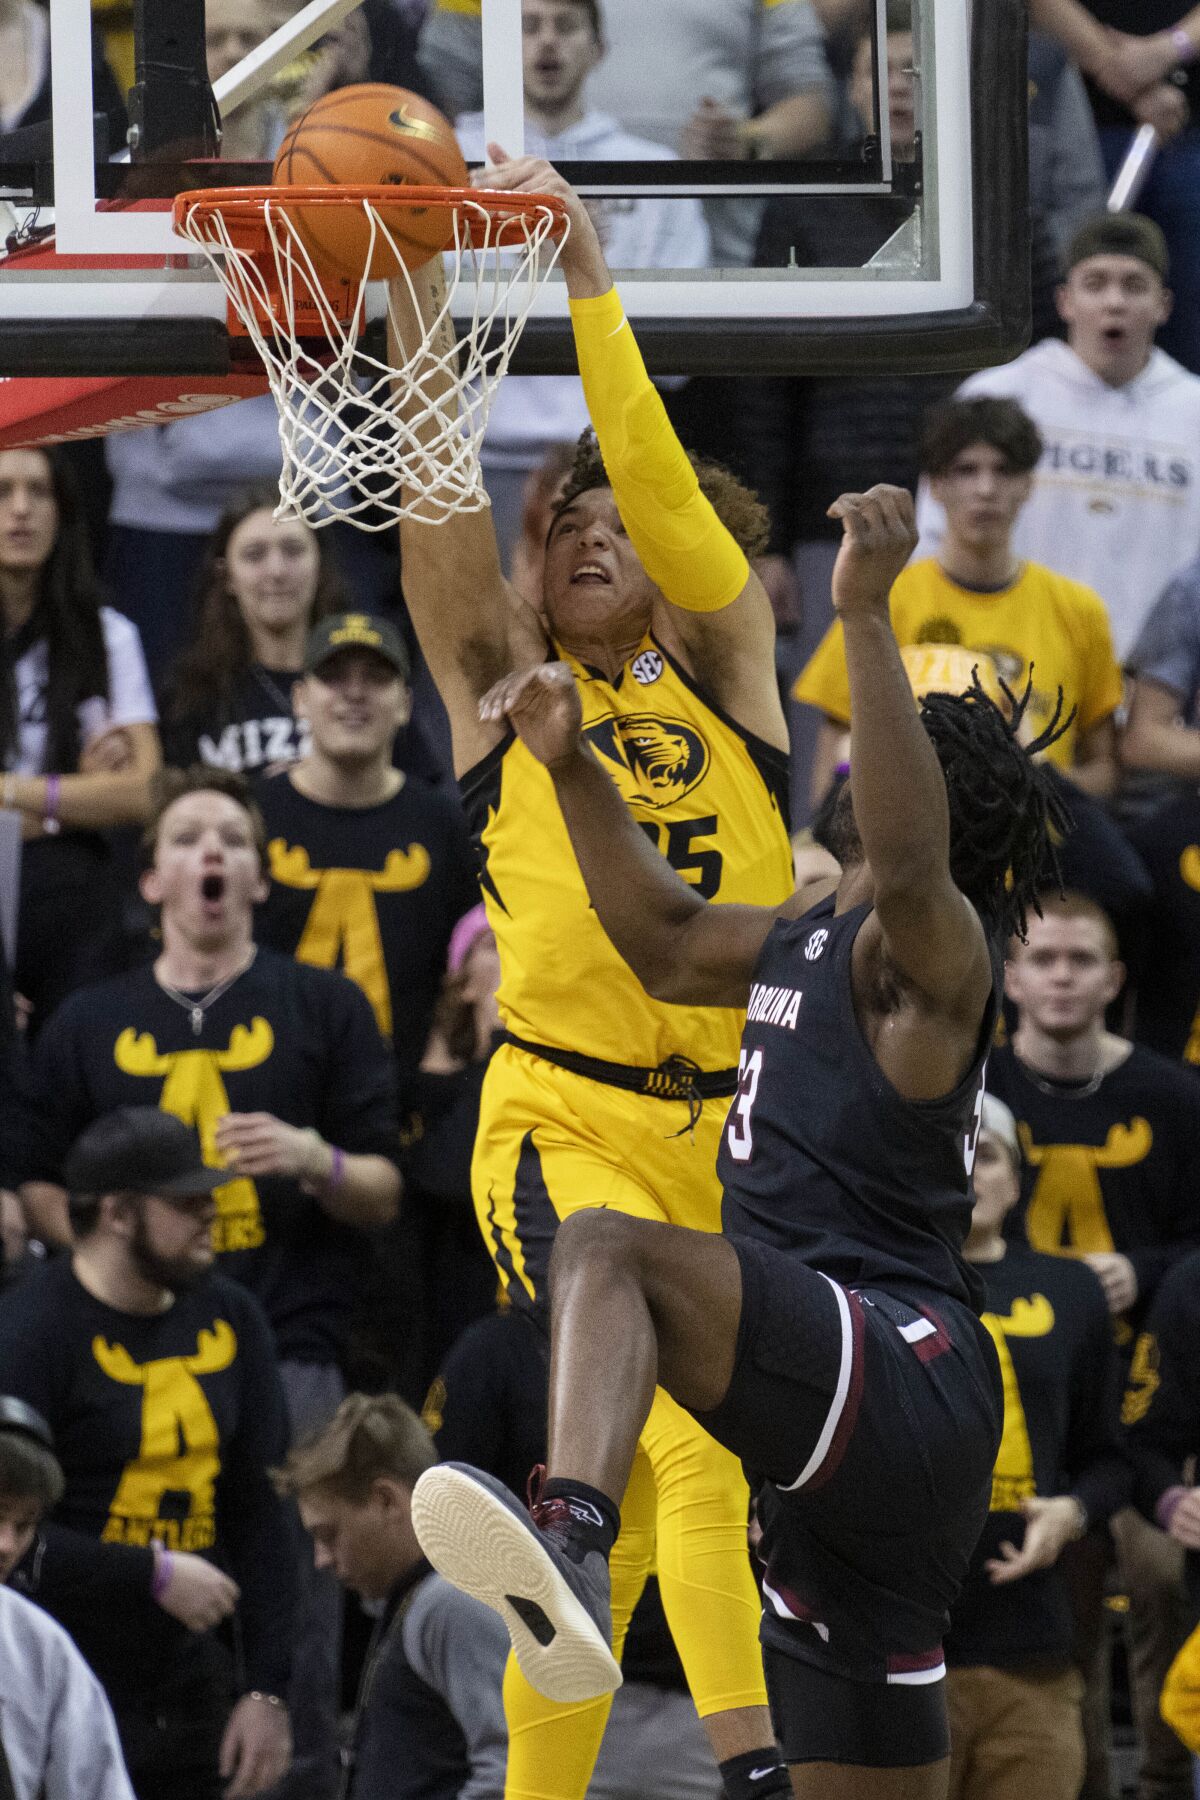 Missouri's Noah Carter, left, dunks the ball over South Carolina's Josh Gray, right, during the first half of an NCAA college basketball game Tuesday, Feb. 7, 2023, in Columbia, Mo. (AP Photo/L.G. Patterson)